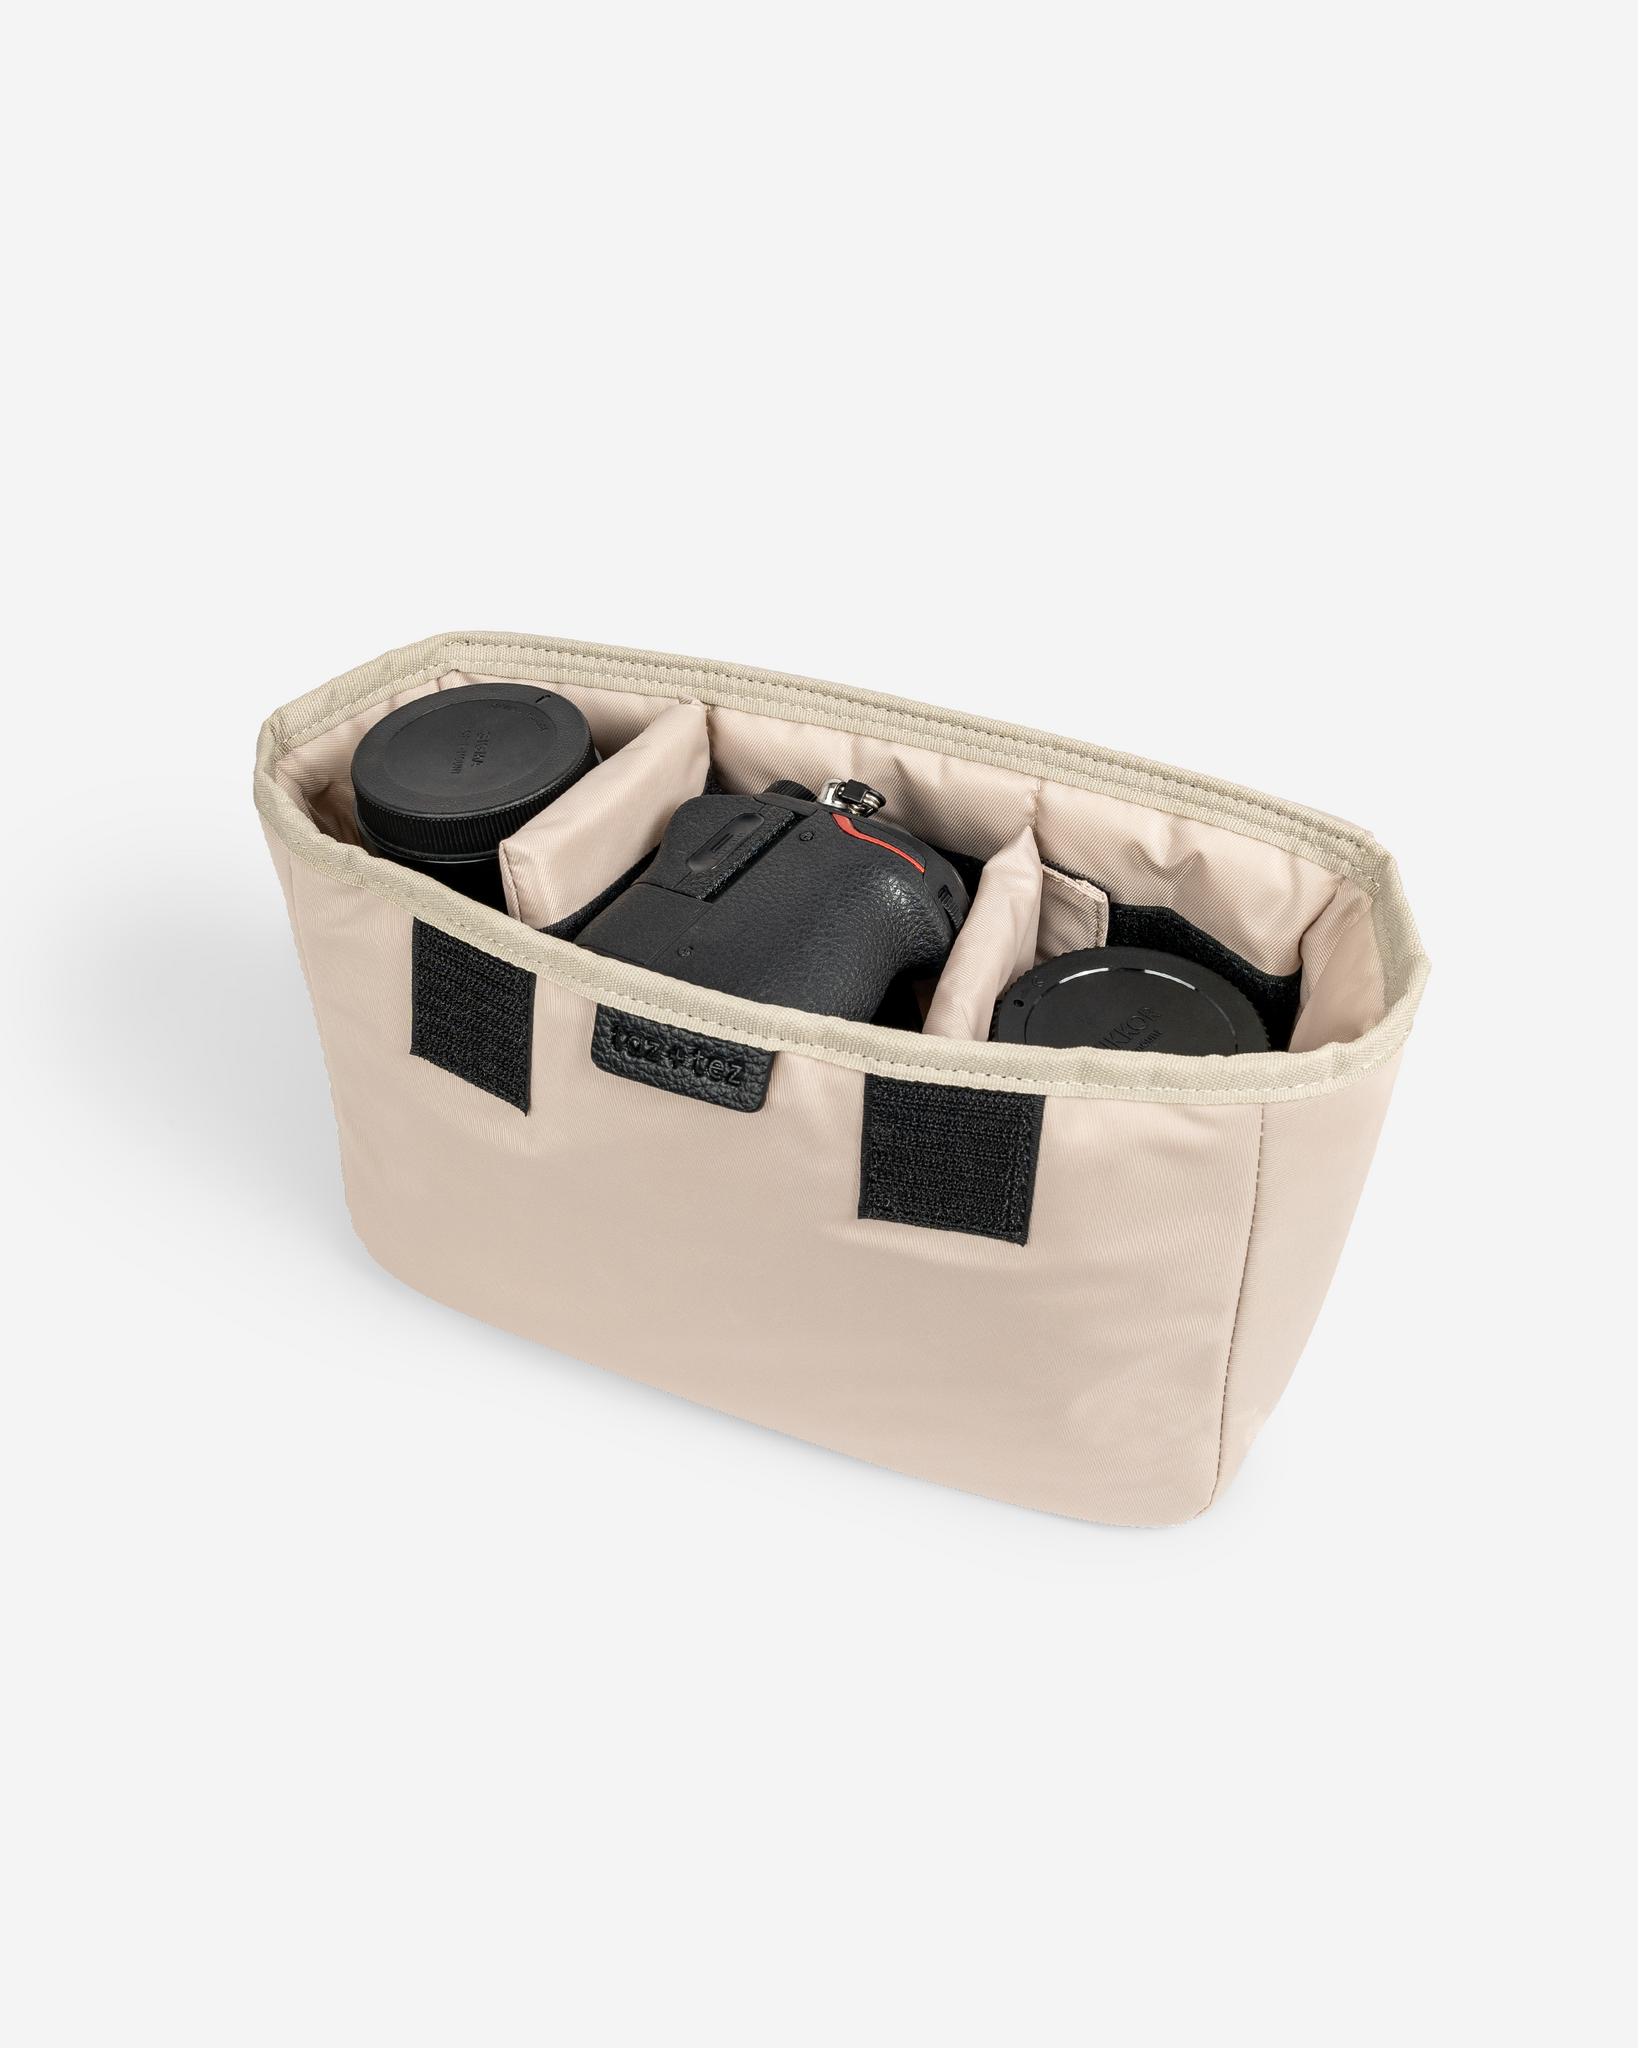 camera bag camera caddy with camera body and lenses inside padded caddy